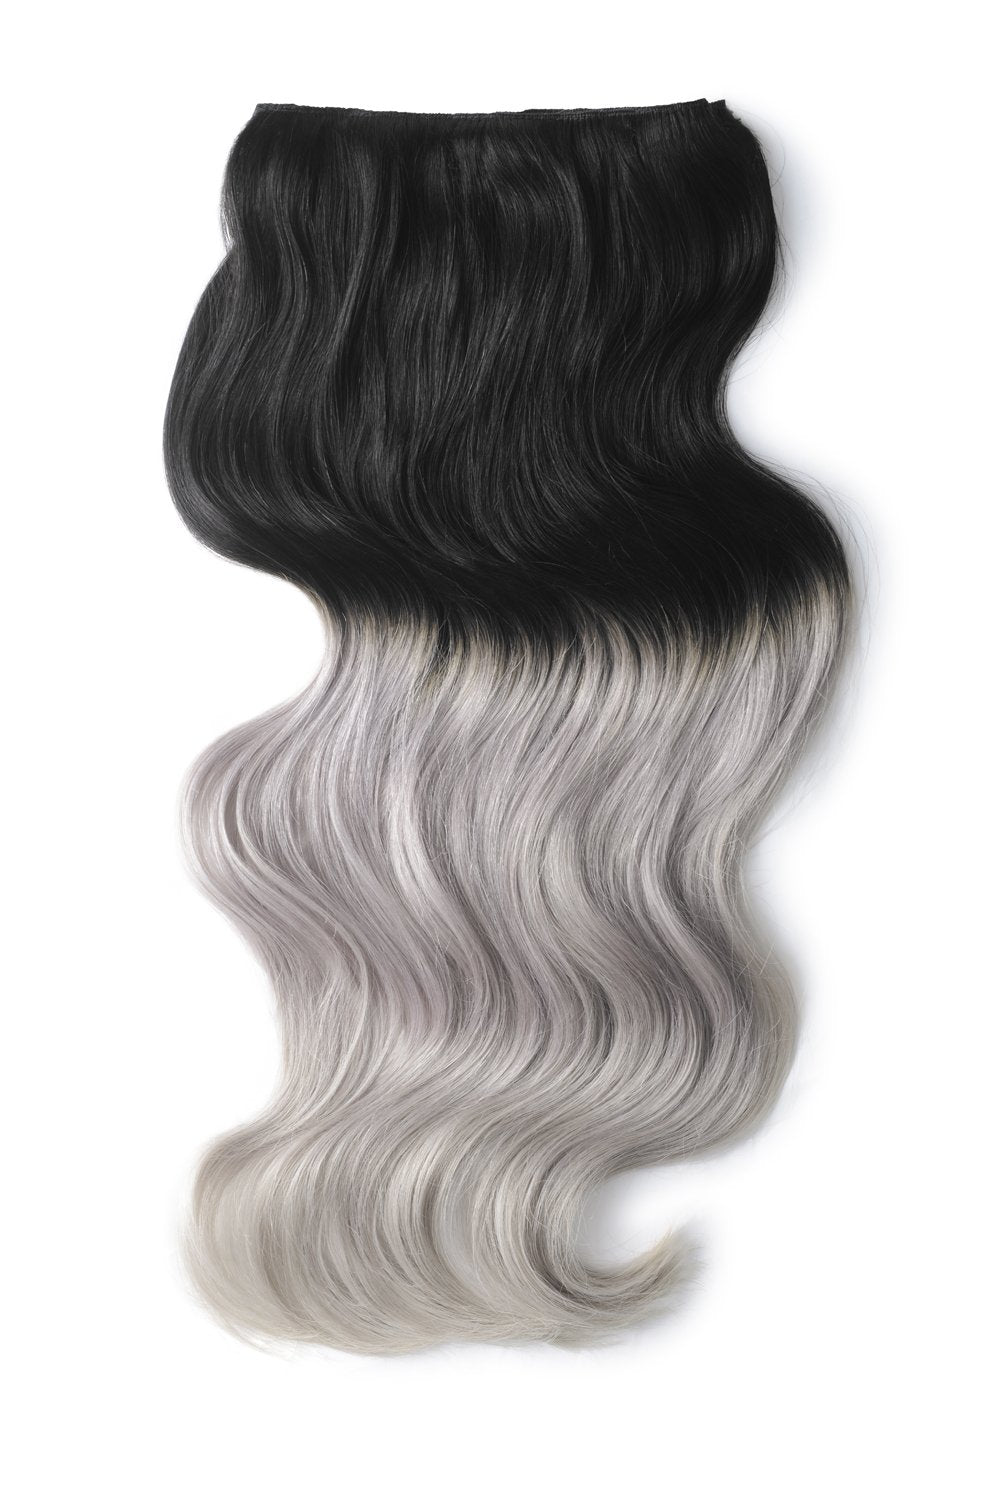 Double Wefted Full Head Remy Clip in Human Hair Extensions - Silver Black Ombre (#T1B/SG)